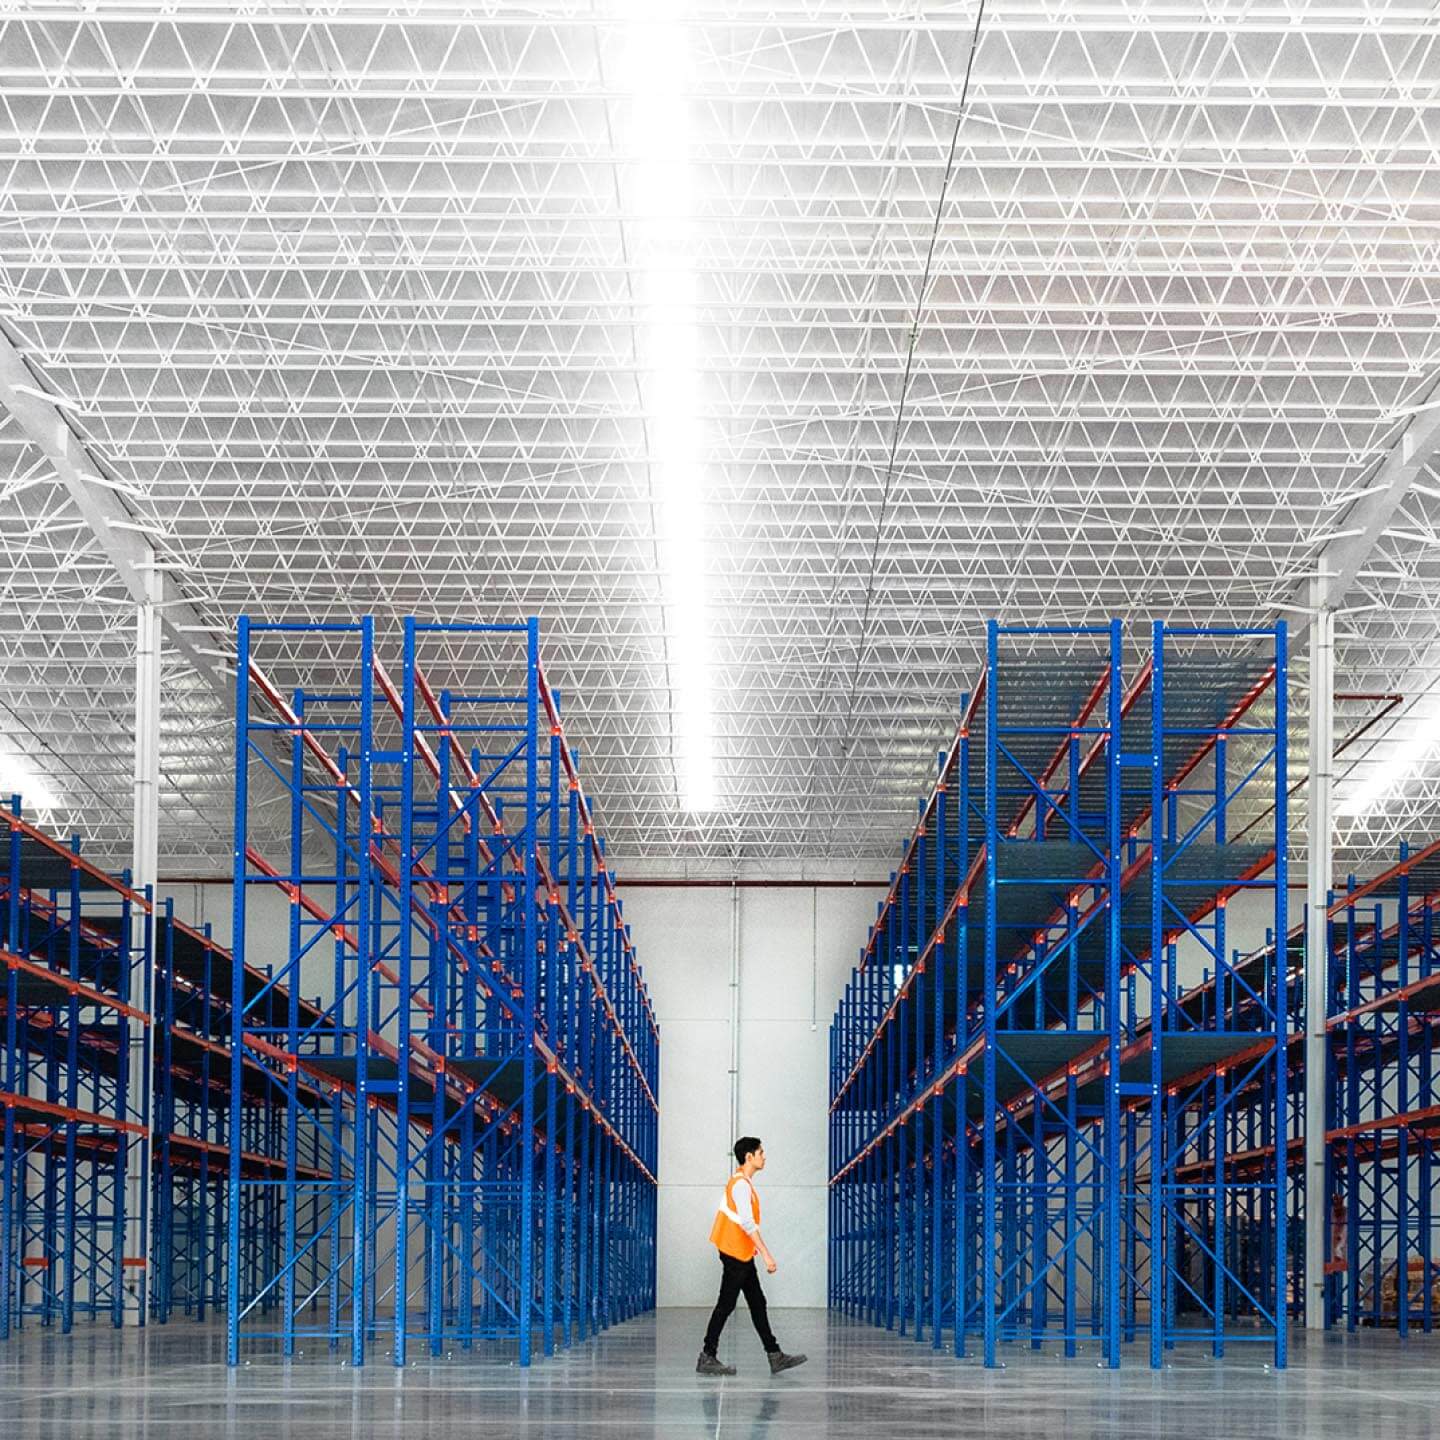 Interior of a large warehouse space